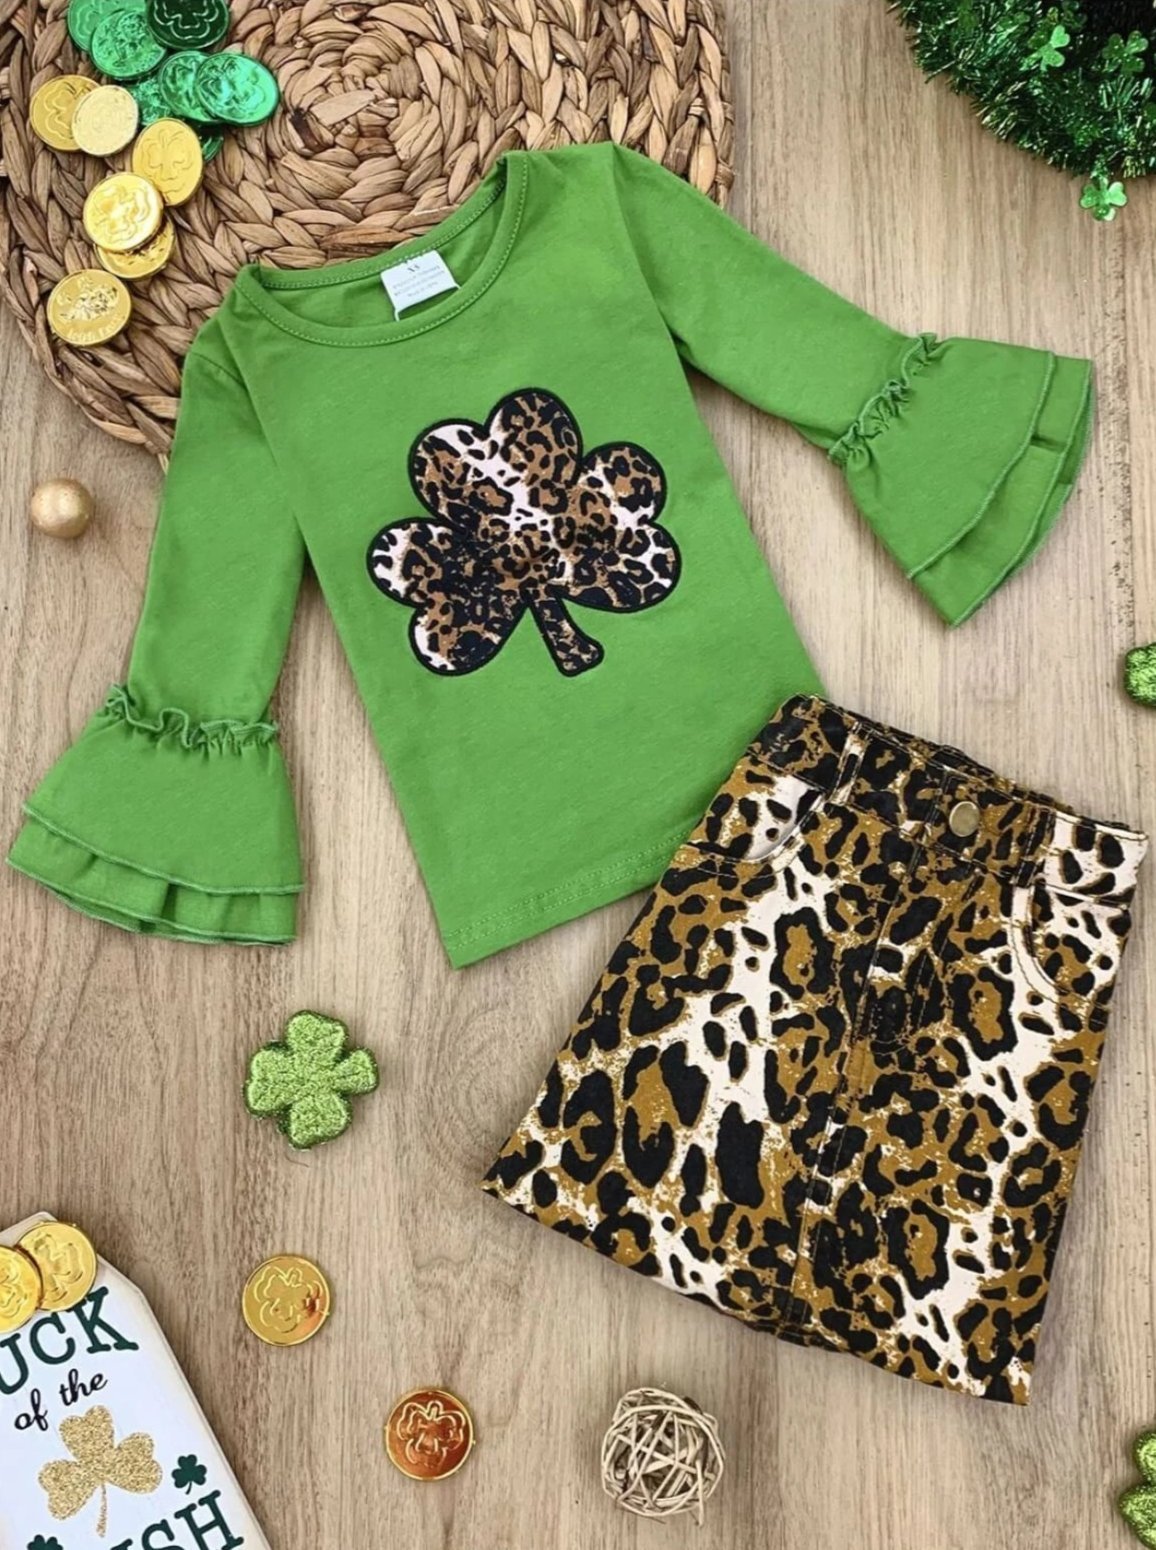 Mia Belle Girls St. Patrick's Day Clover Top And Leopard Skirt Set